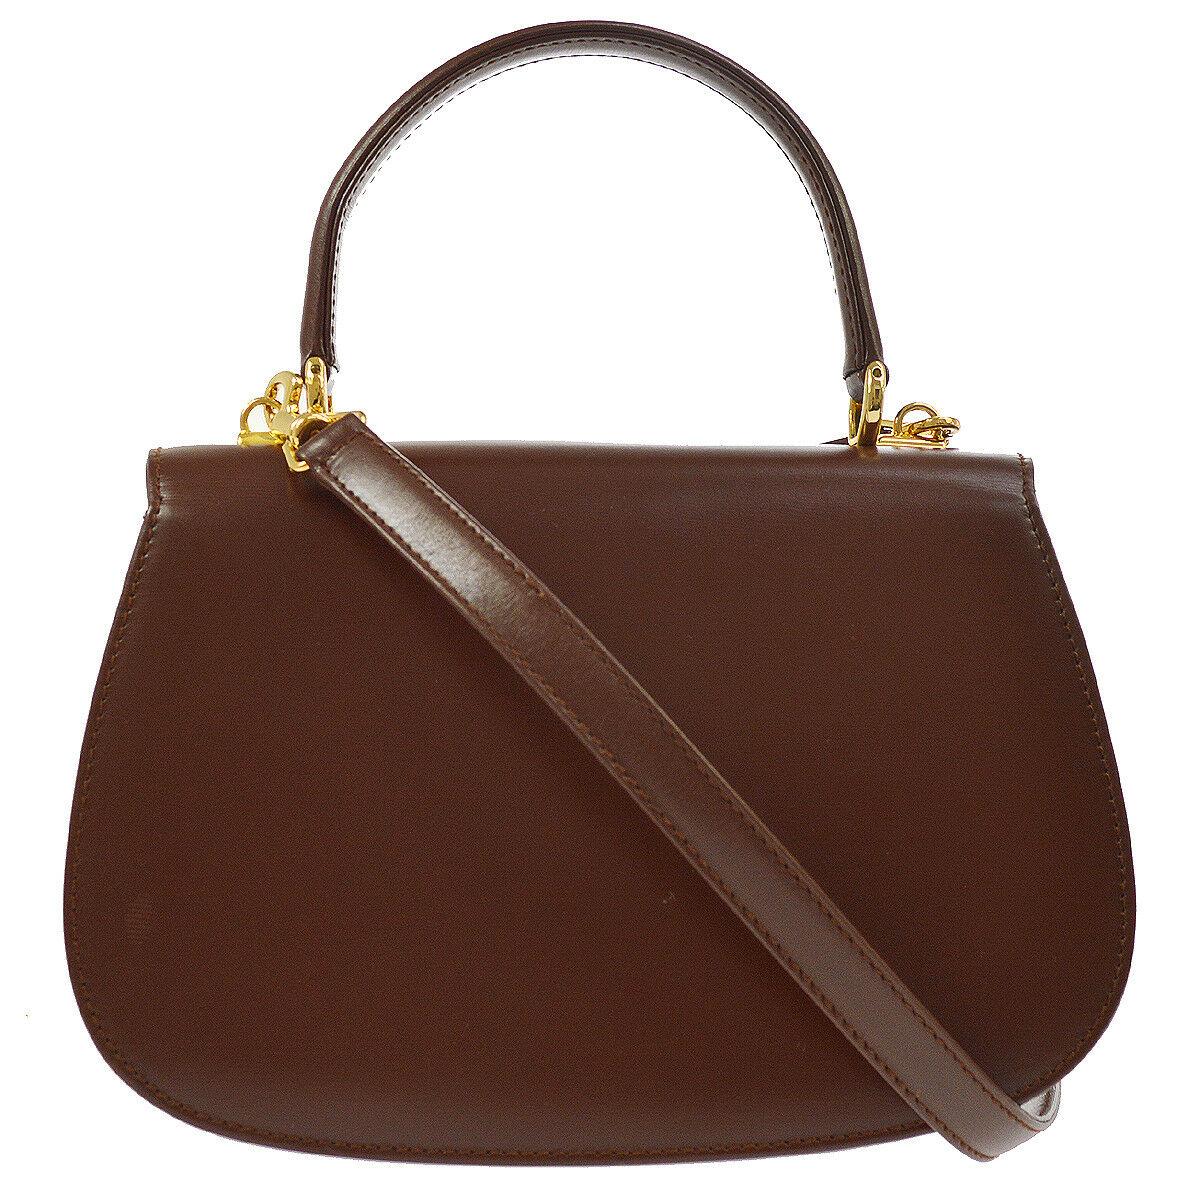 Gucci Chocolate Leather Gold Kelly Style Top Handle Satchel Flap Bag in Box im Zustand „Hervorragend“ in Chicago, IL